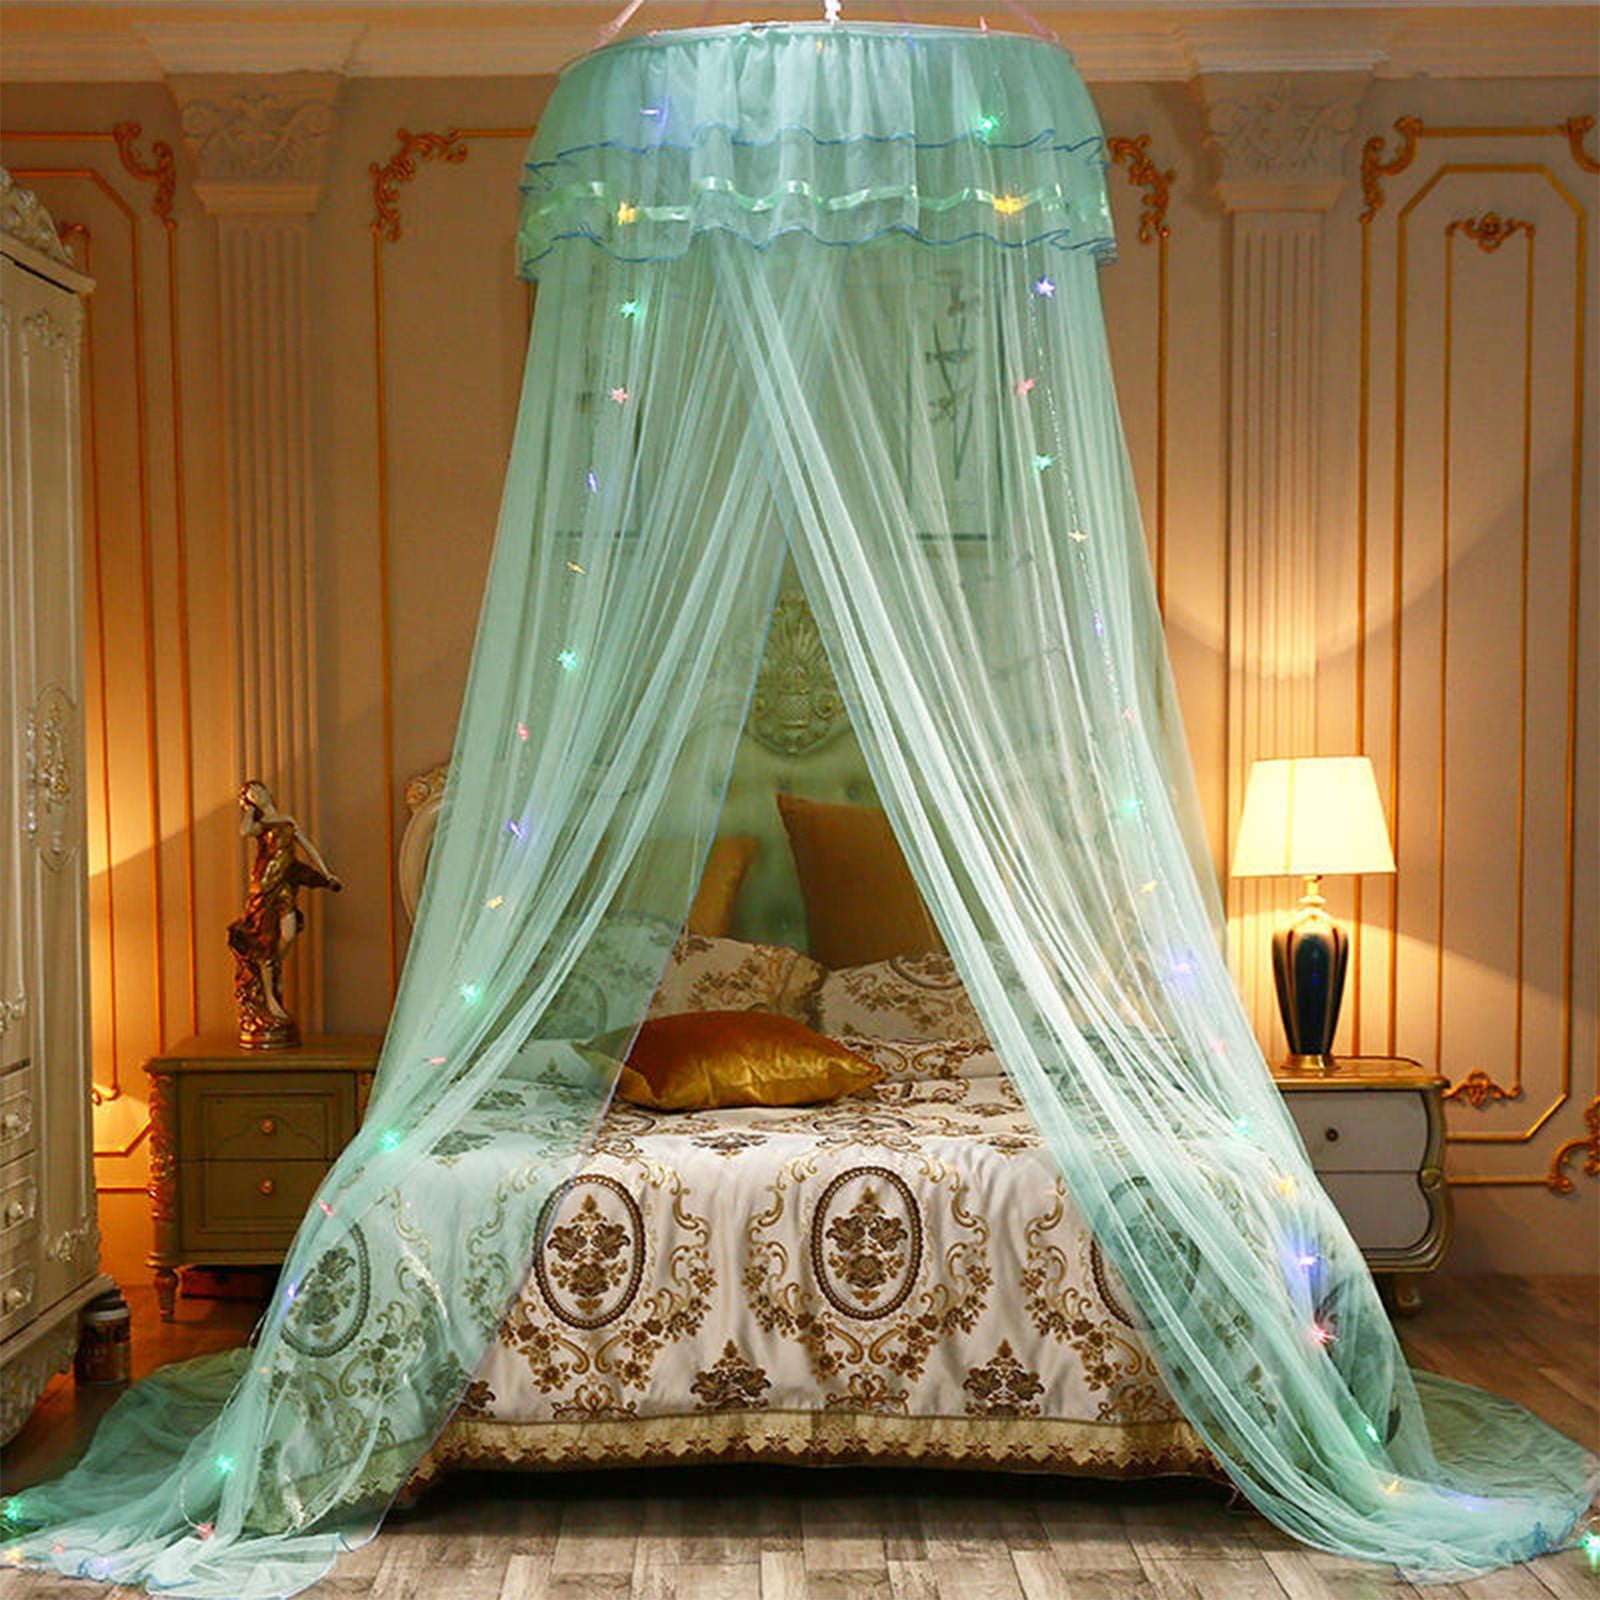 Tuphregyow Mosquito Net Bed Canopy,Canopy Bed Curtains,Princess Bed ...